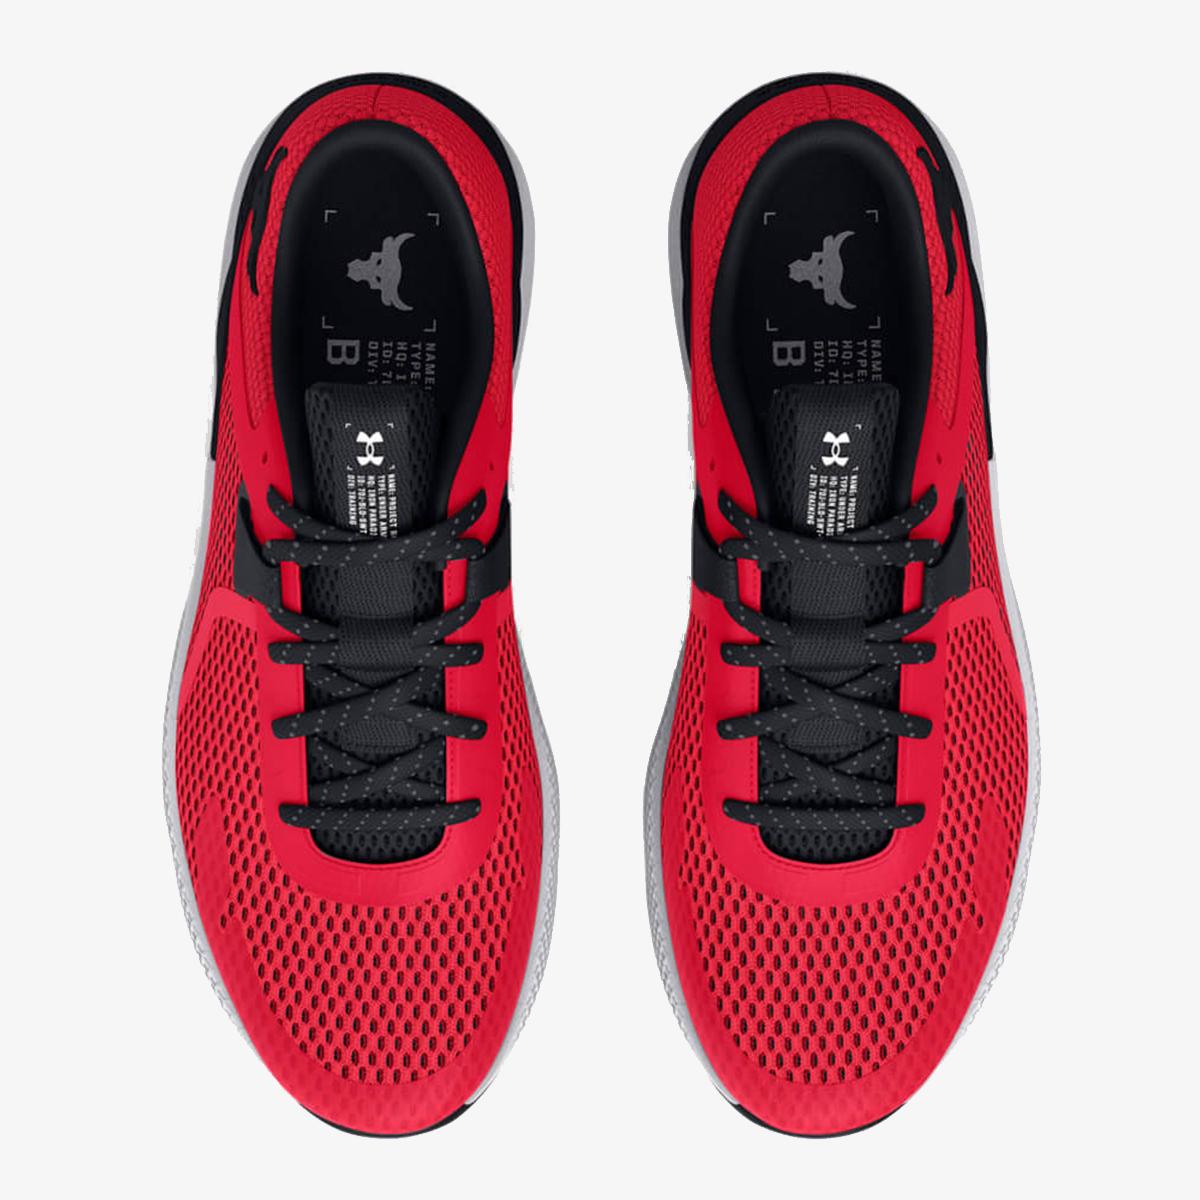 UNDER ARMOUR UA PROJECT ROCK BSR 2 